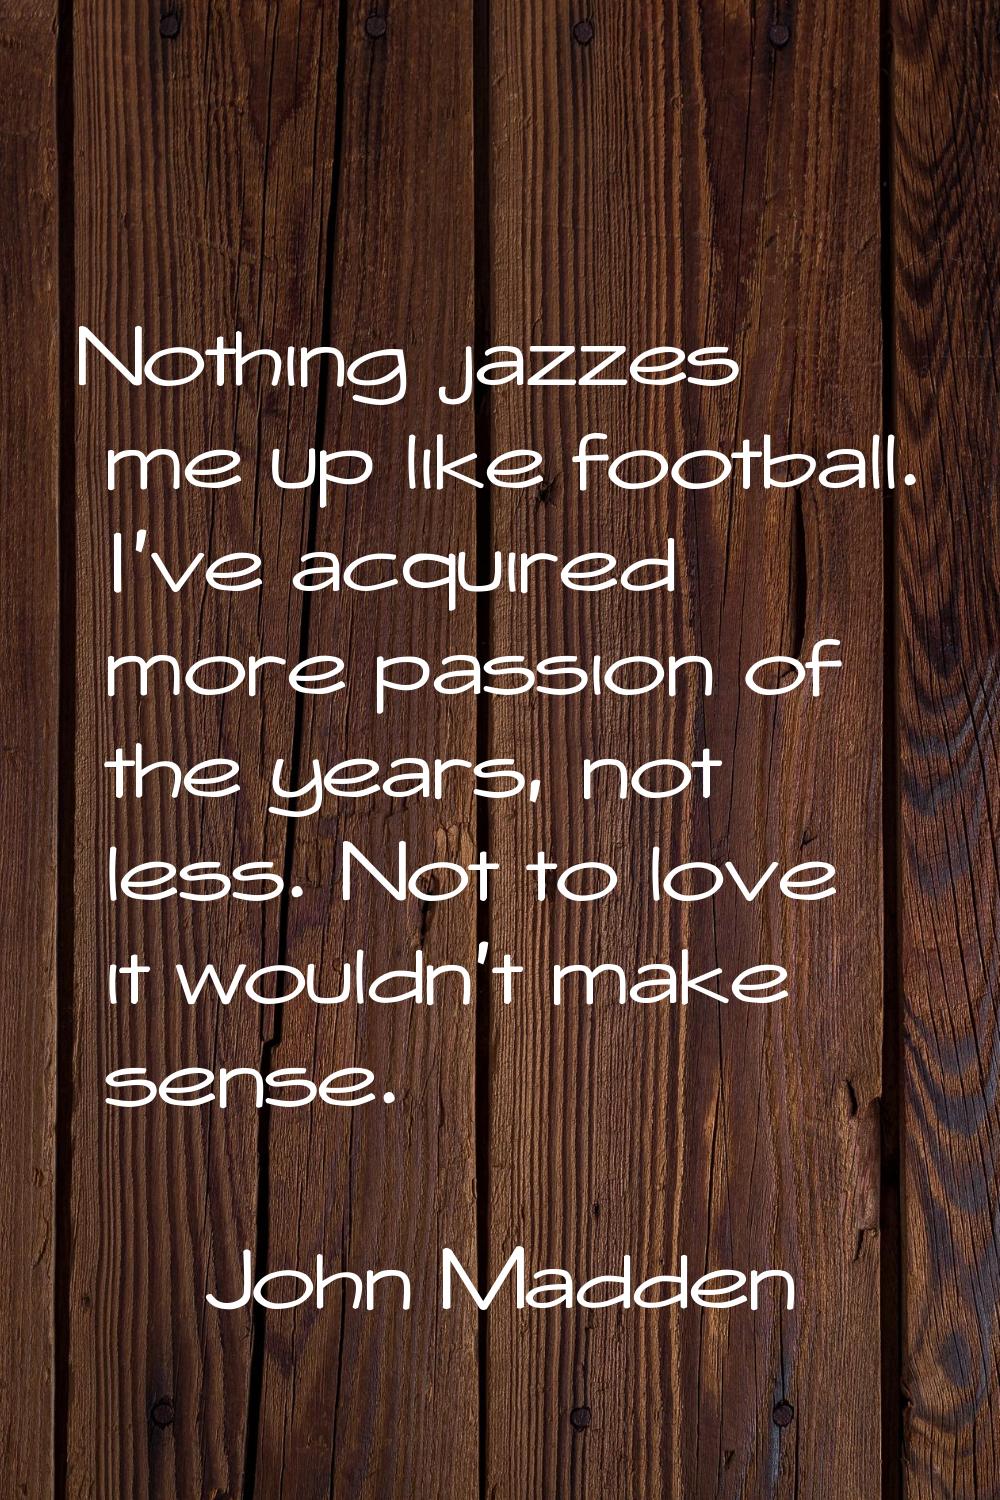 Nothing jazzes me up like football. I've acquired more passion of the years, not less. Not to love 